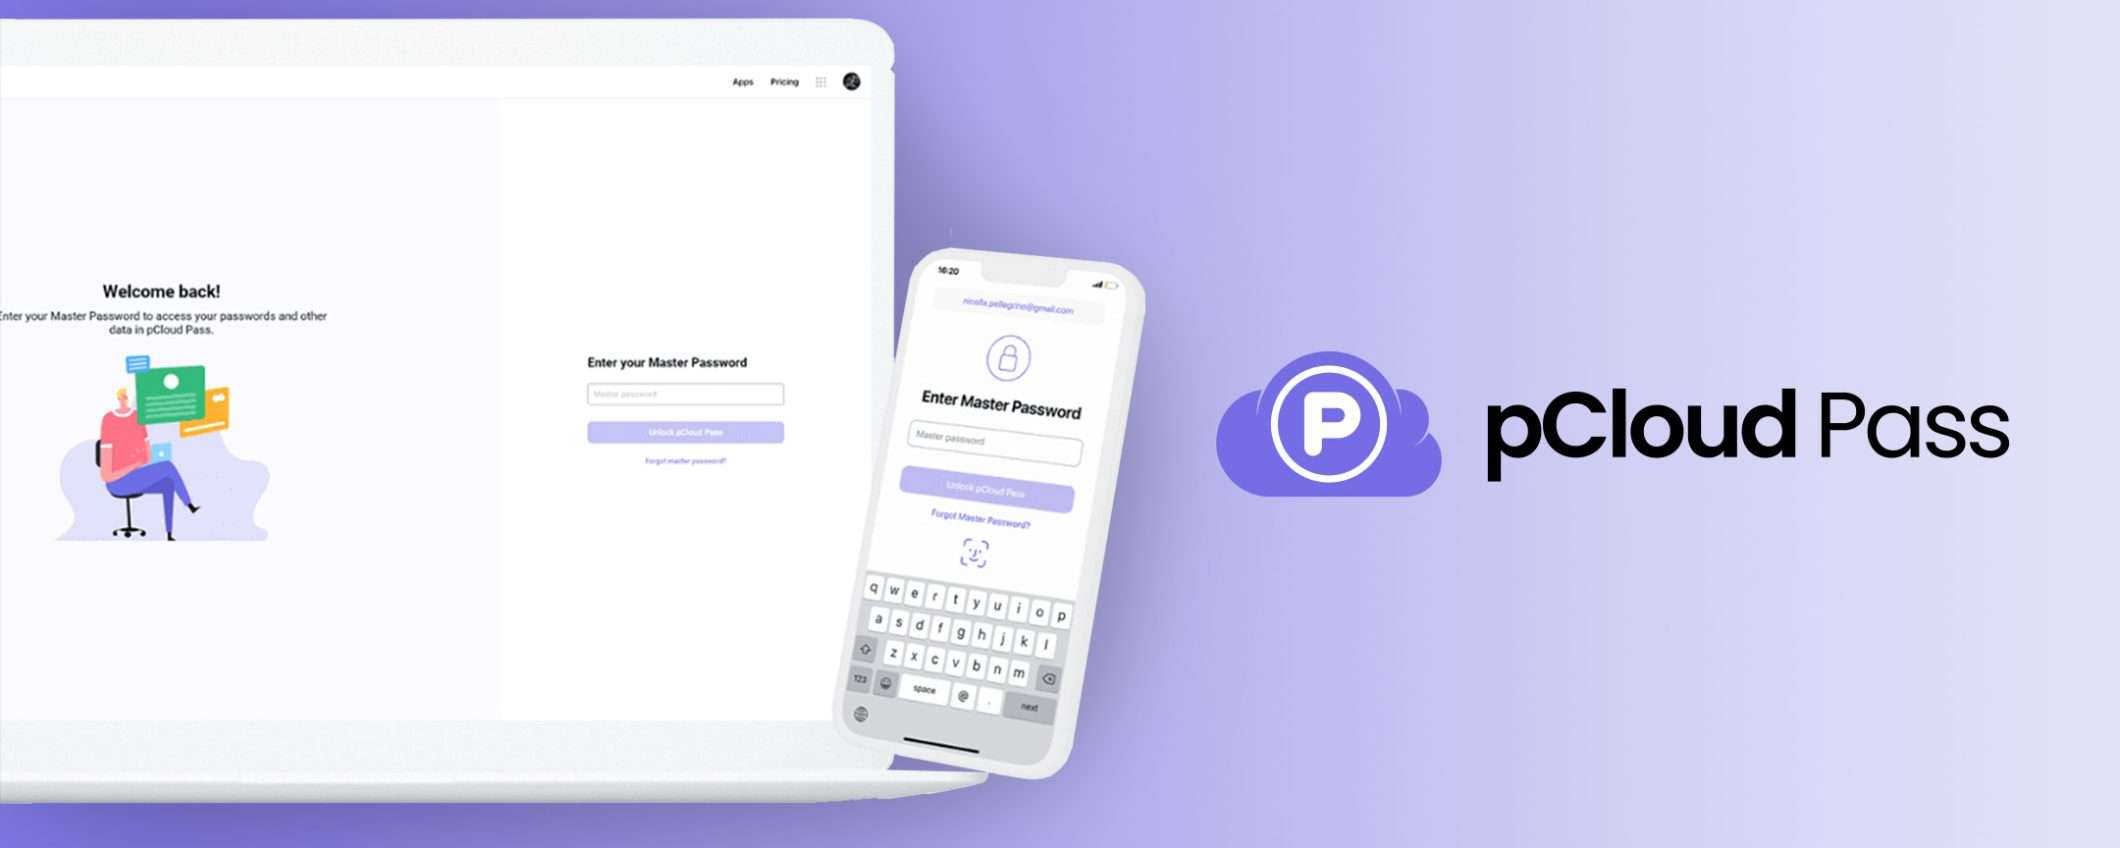 pCloud lancia il nuovo password manager ultra-sicuro